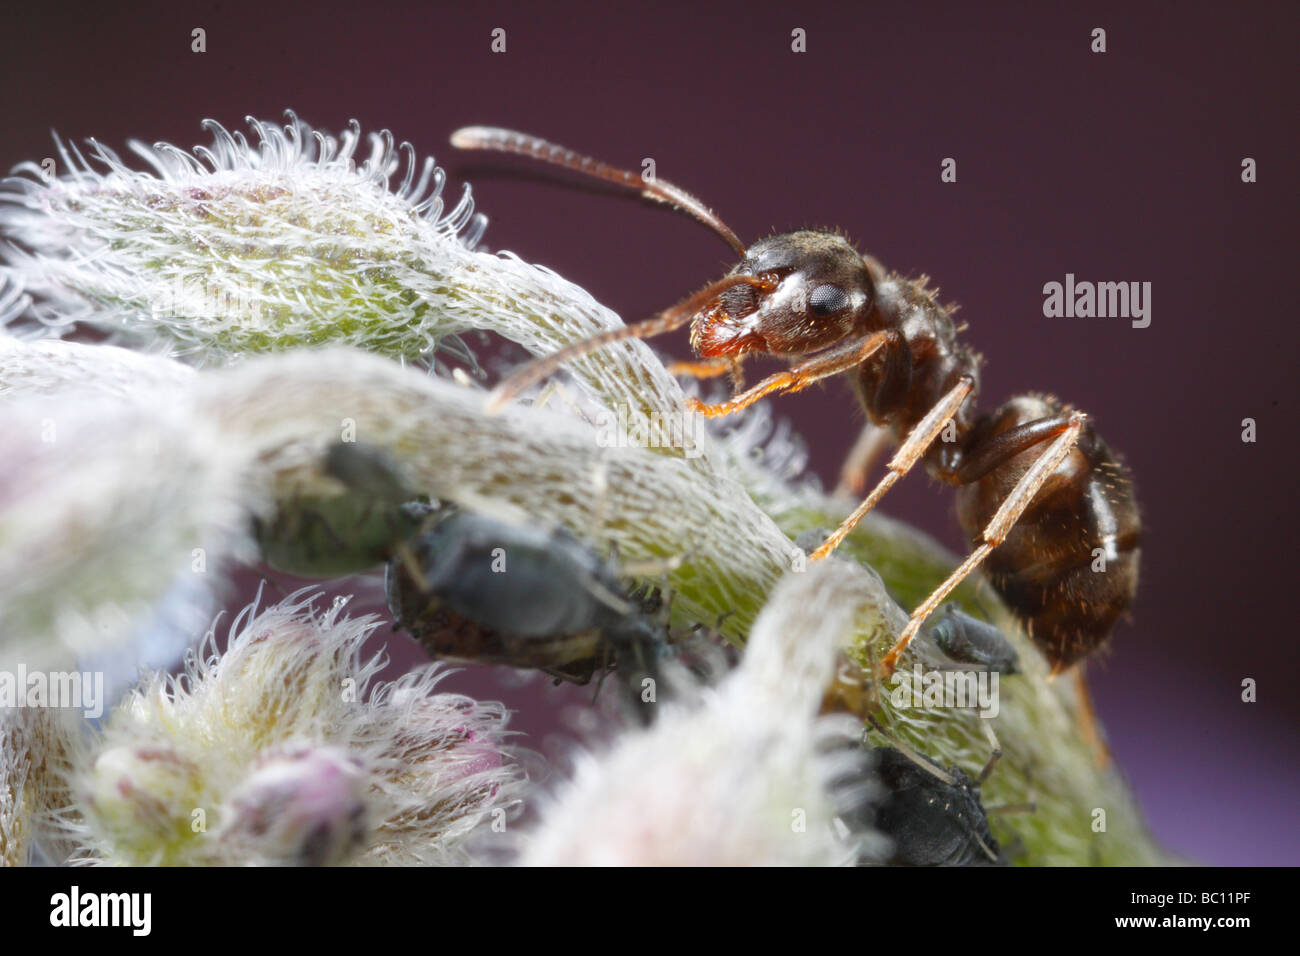 Lasius niger, the black garden ant, and aphids (Aphis fabae). The flower is a borage or star flower. Stock Photo